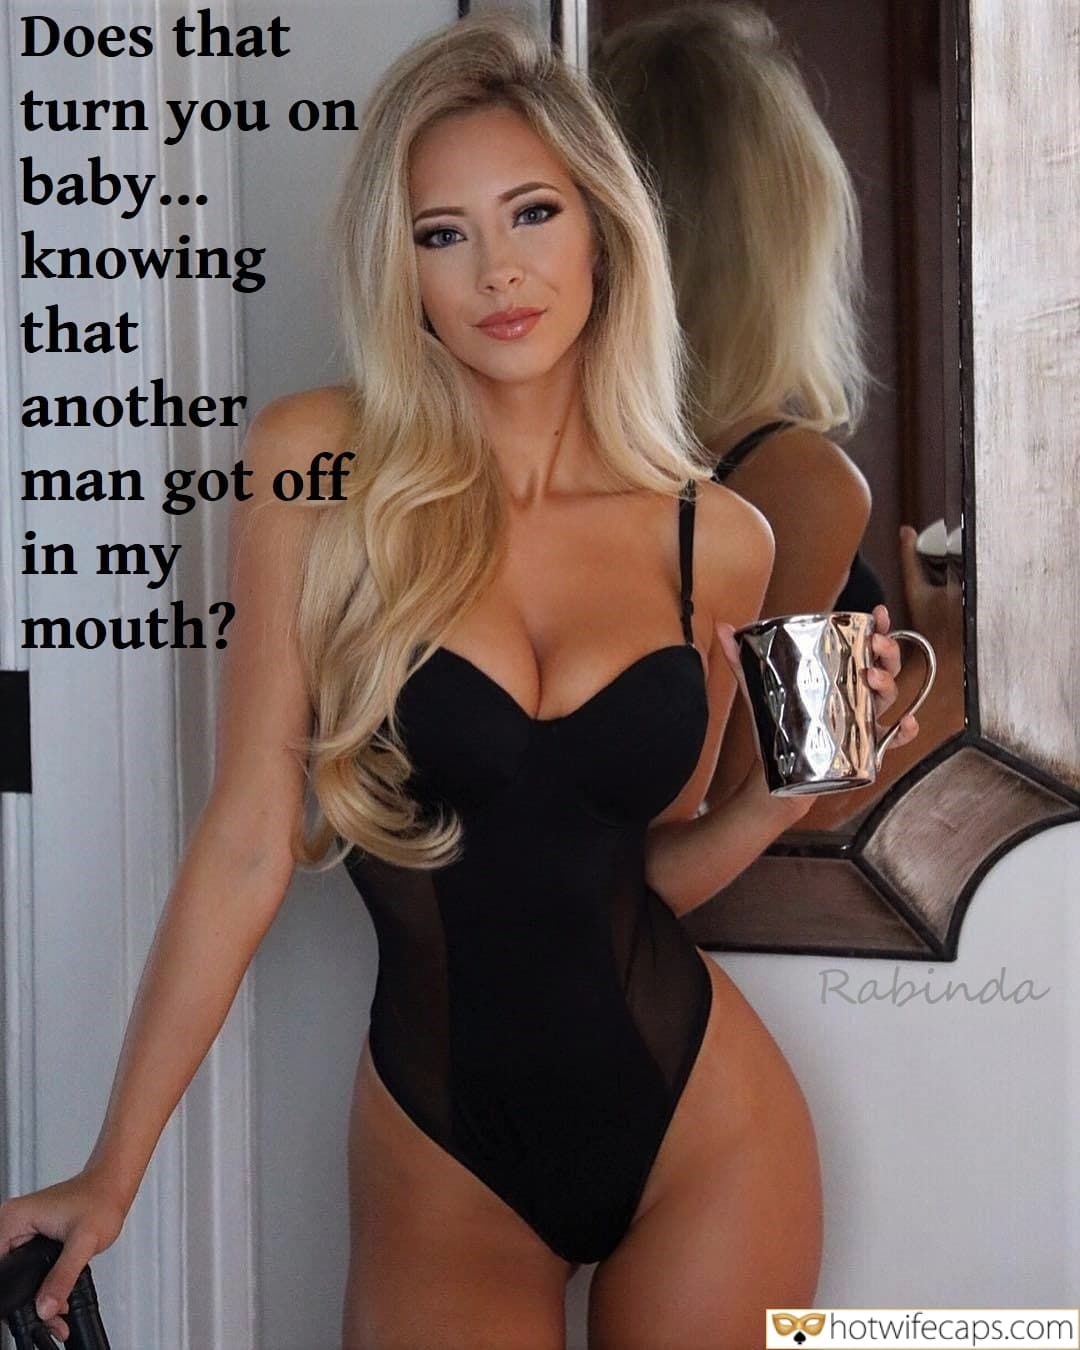 Bigger Cock, Blowjob, Bull, Bully, Sexy Memes, Wife Sharing Hotwife Caption №565248 mature blonde with a perfect body